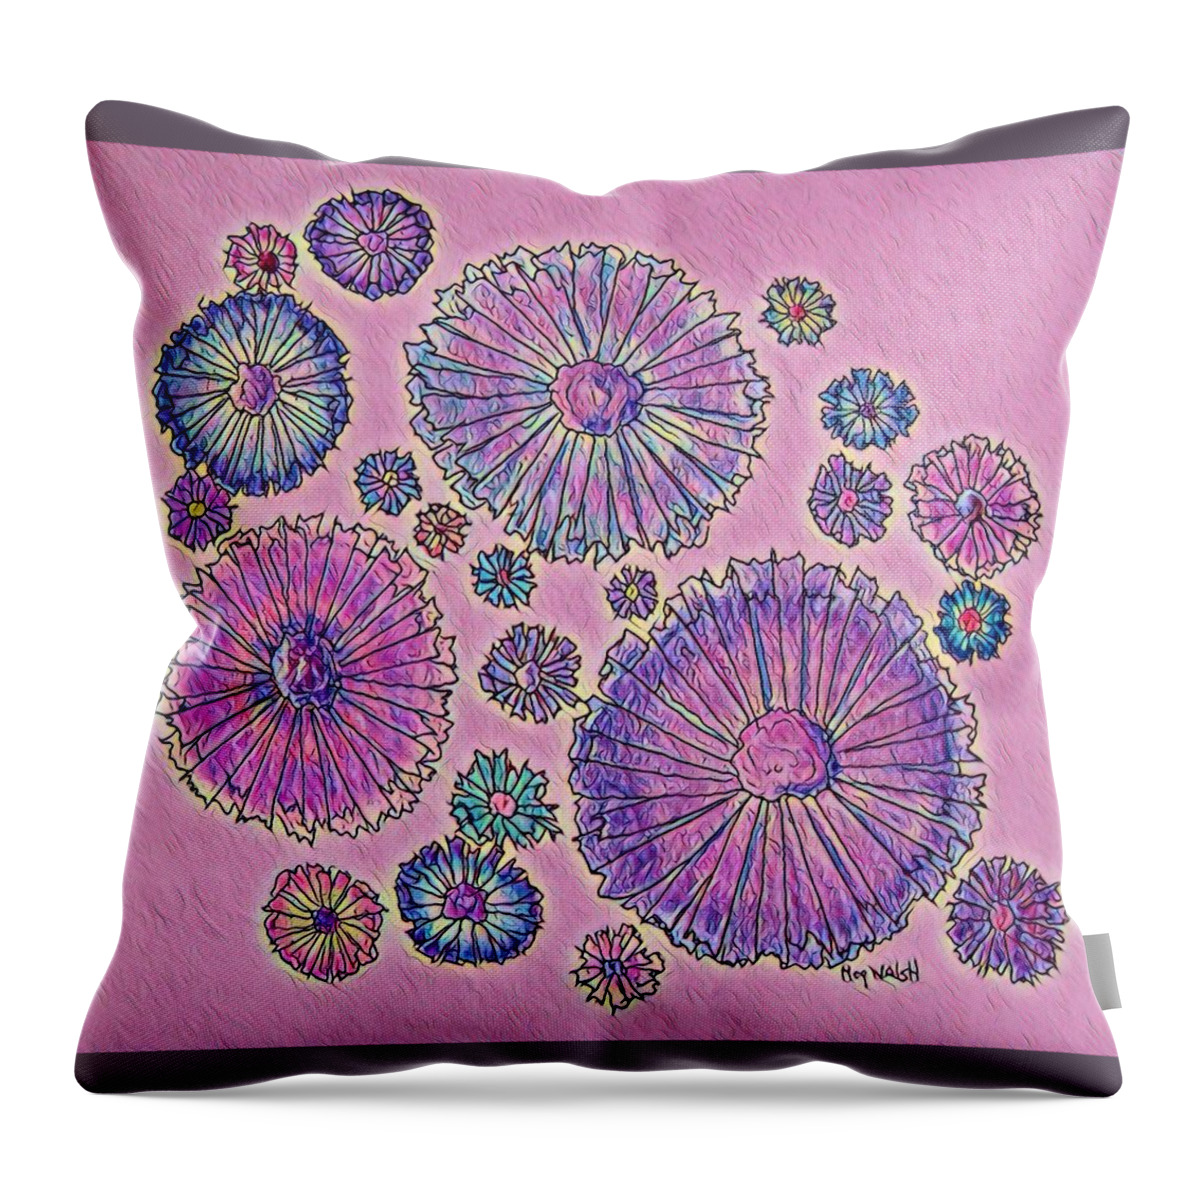 Flowers Throw Pillow featuring the digital art Digital flowers no.1 by Megan Walsh